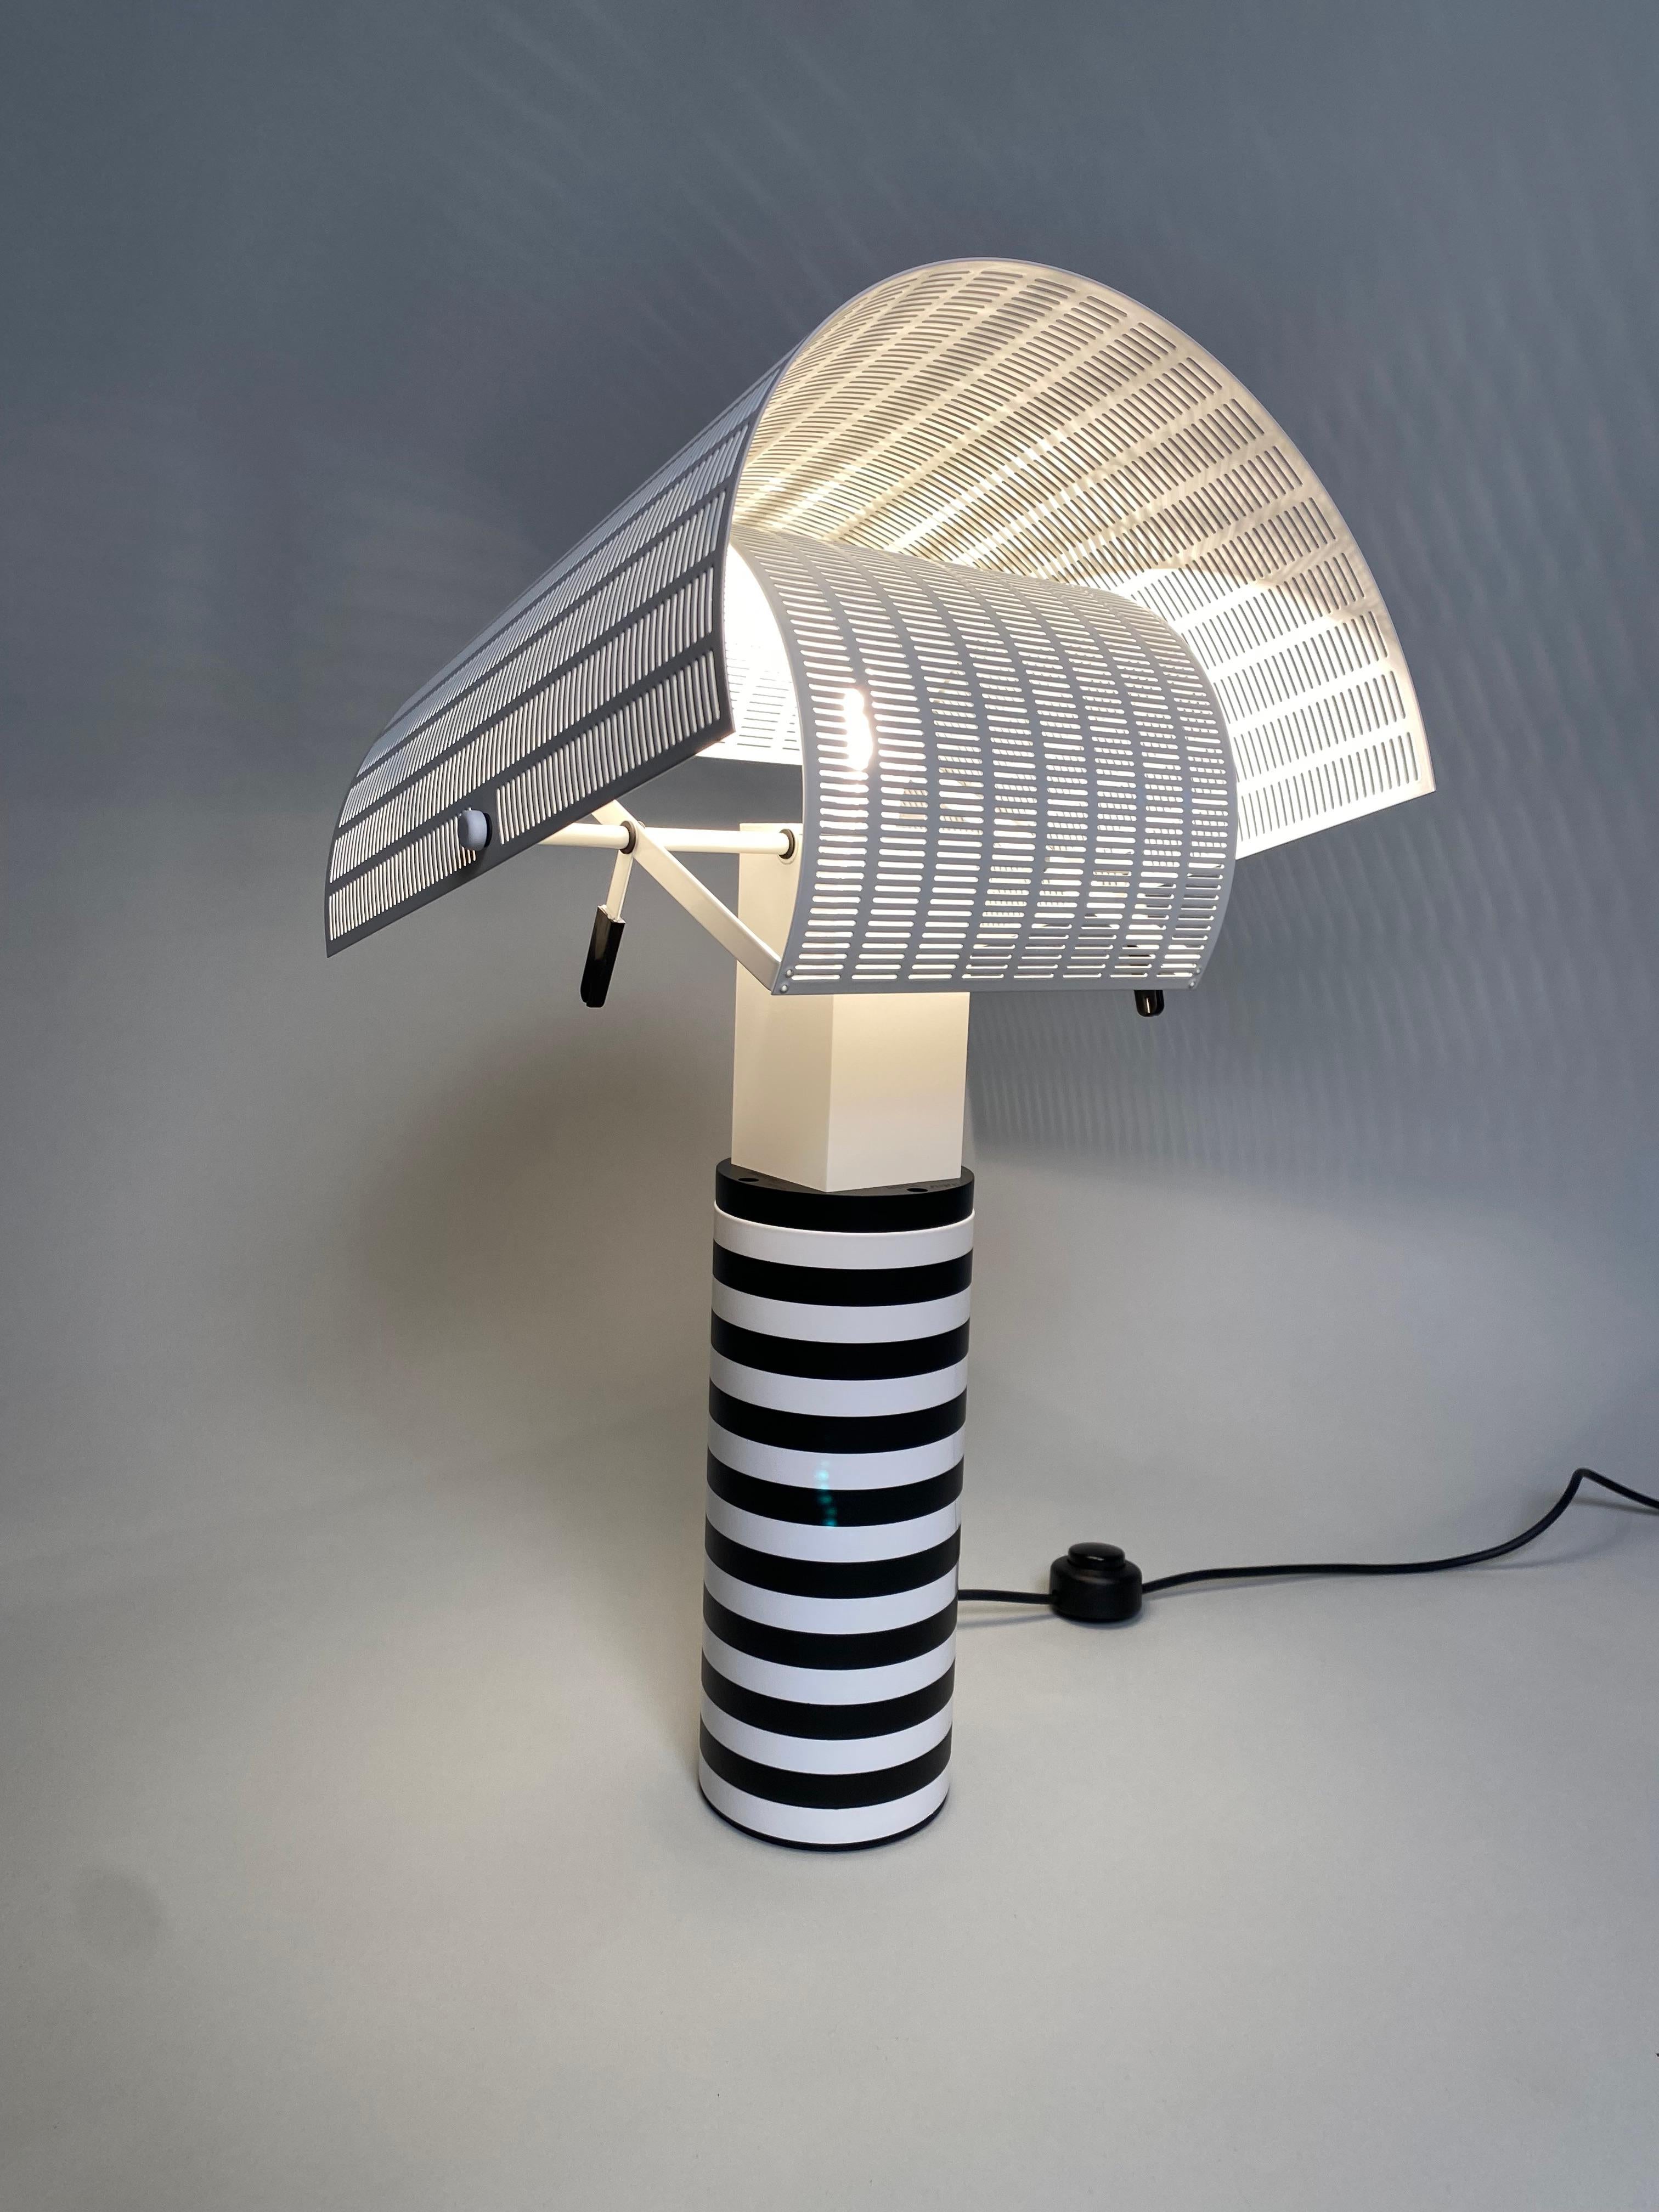 Pair of postmodern table lamps by the famous architect Mario Botta. The adjustable lampshade in painted metal reproduces the hat of the Japanese Shoguns, from which it takes its name, and is really convenient for directing the light beam in the